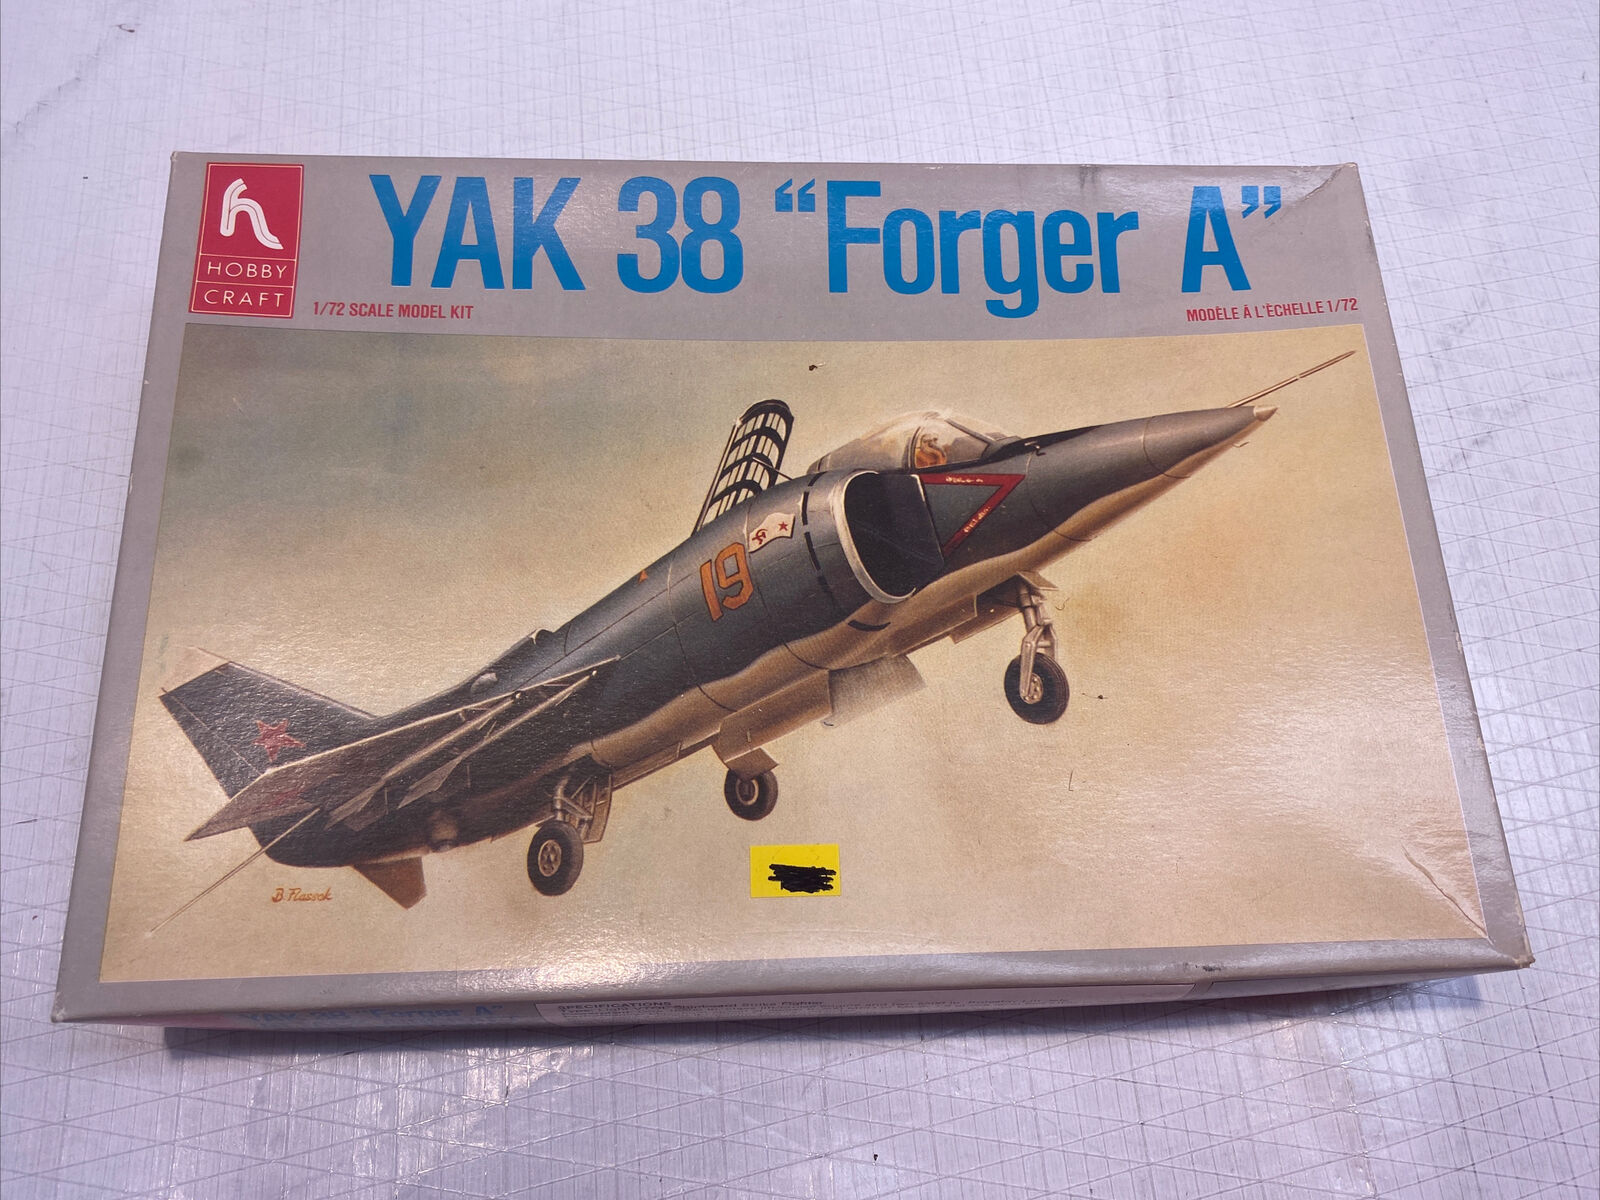 Hobby Craft 1:72 Yak-38 Forger A - Plastic Aircraft Model Kit  HC 1384